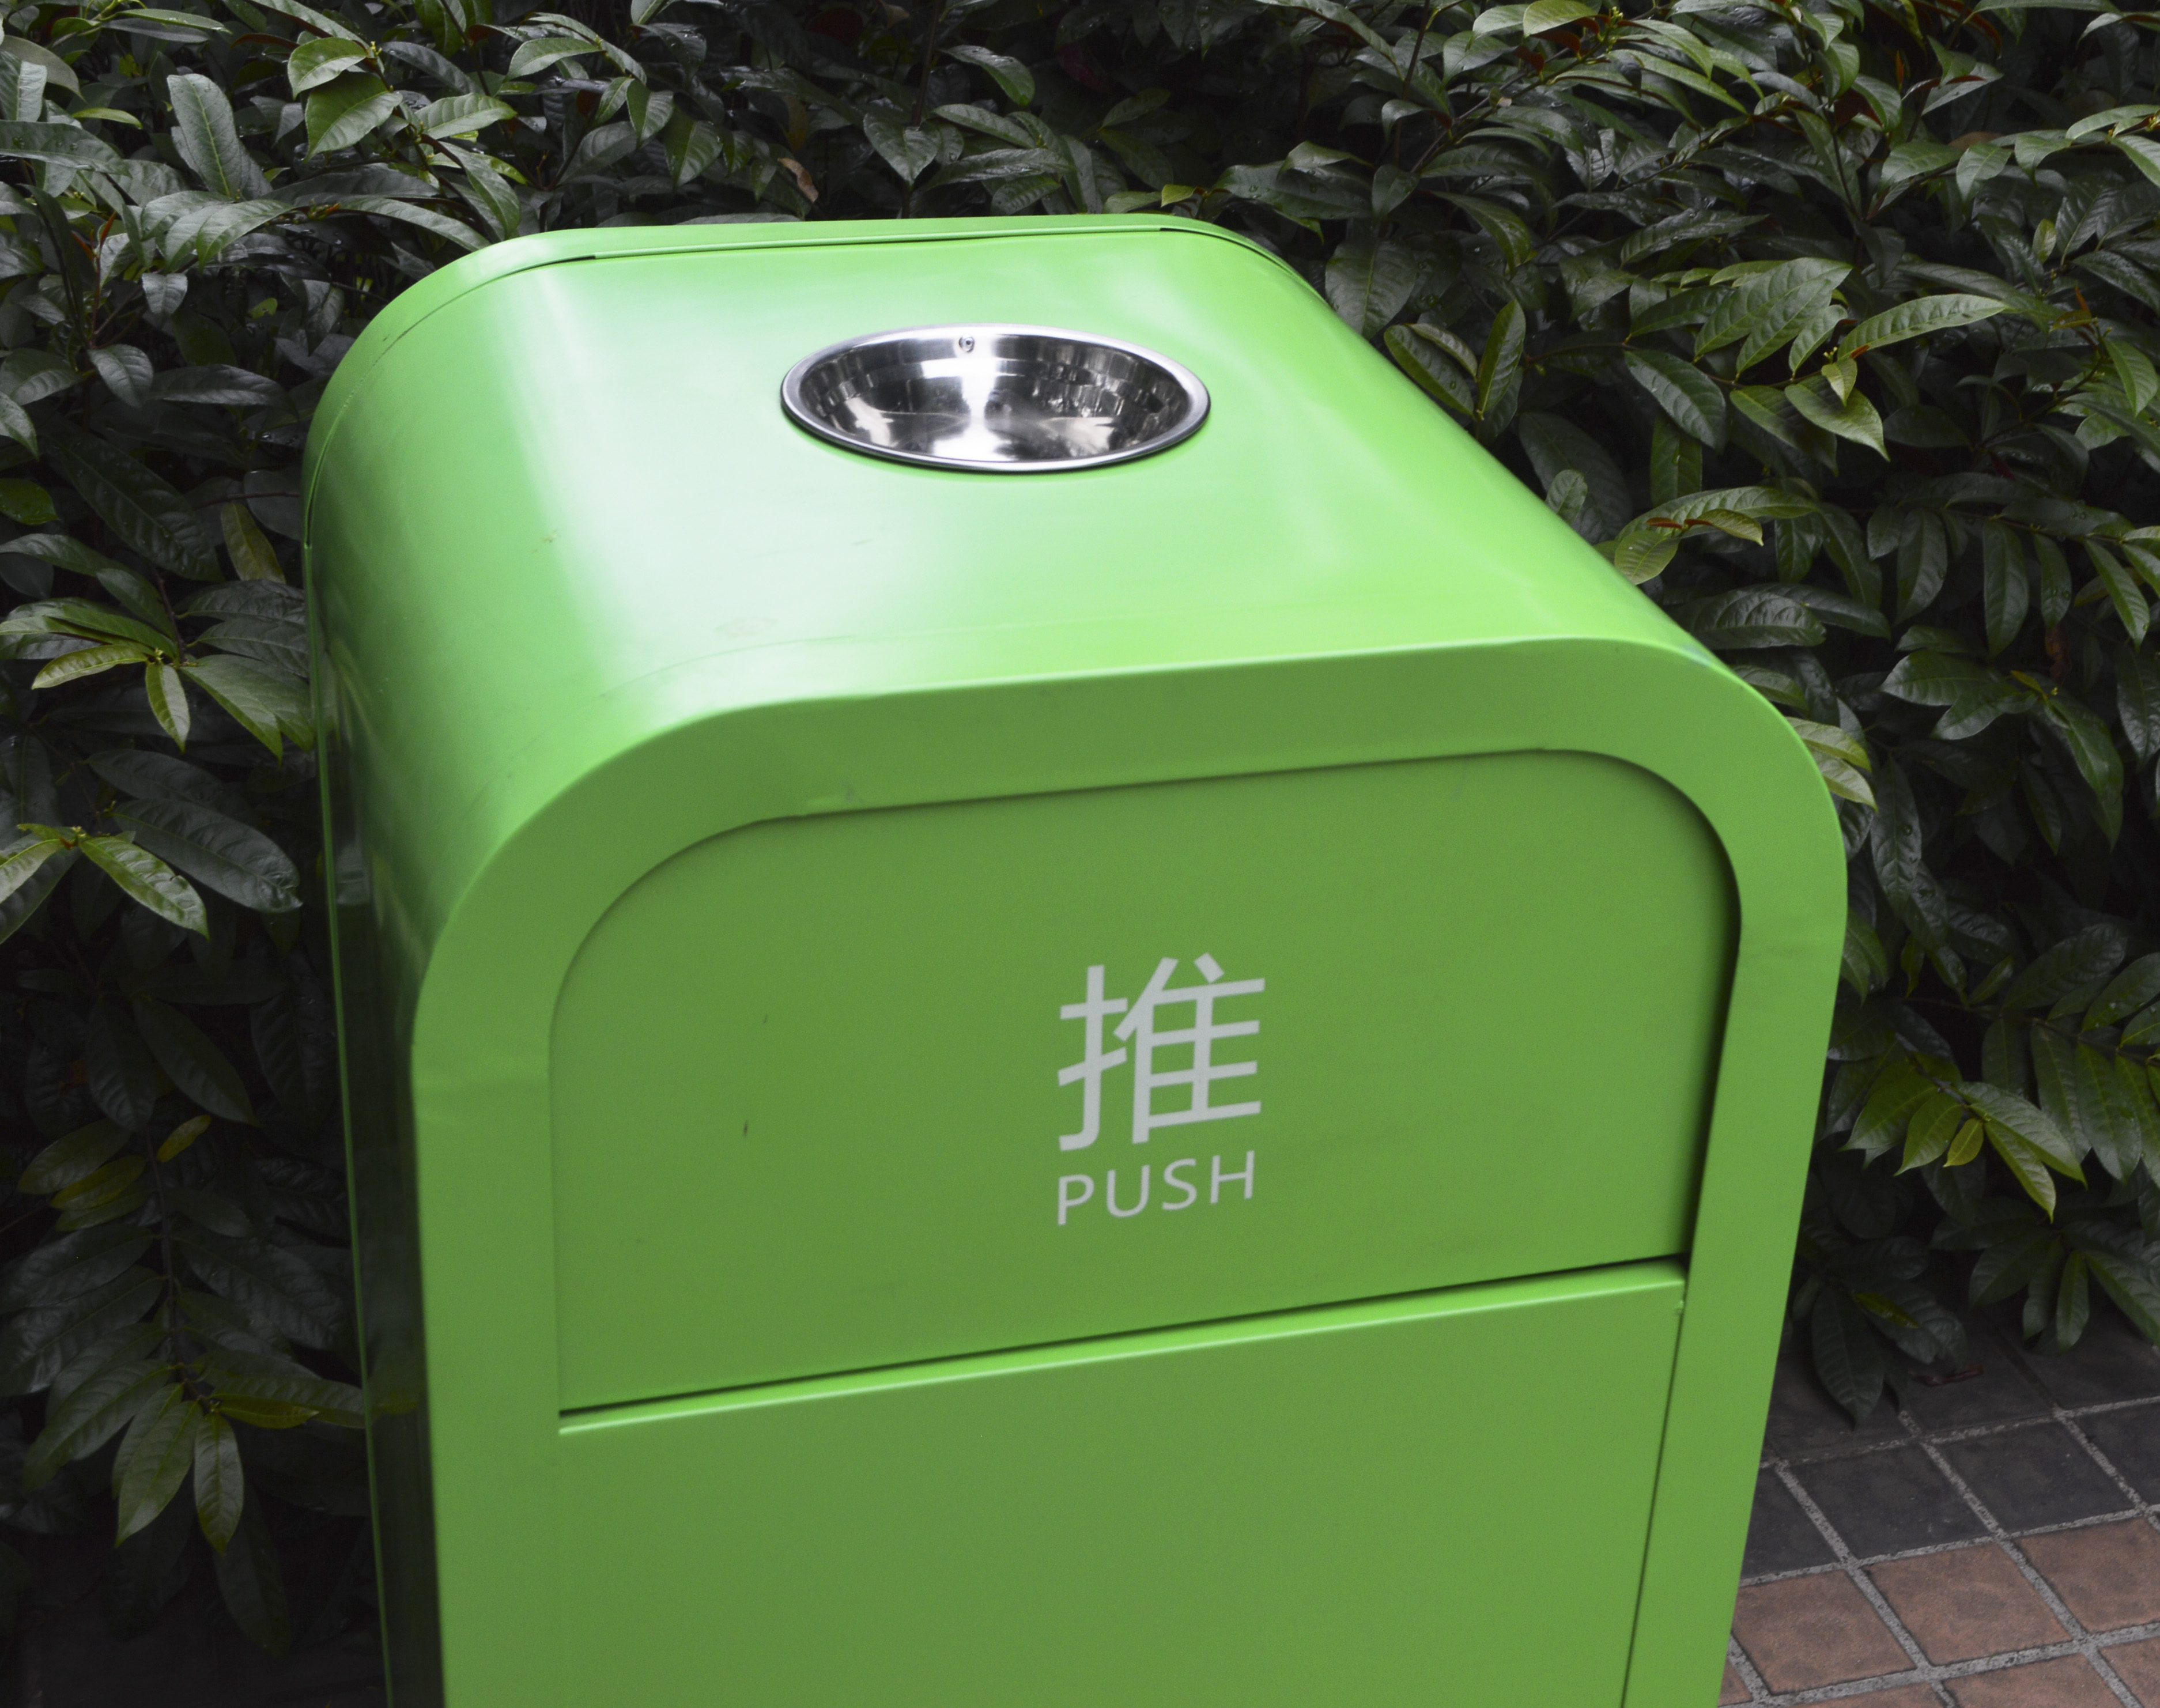 Waste Bin for Outdoor Use with Metal Material 